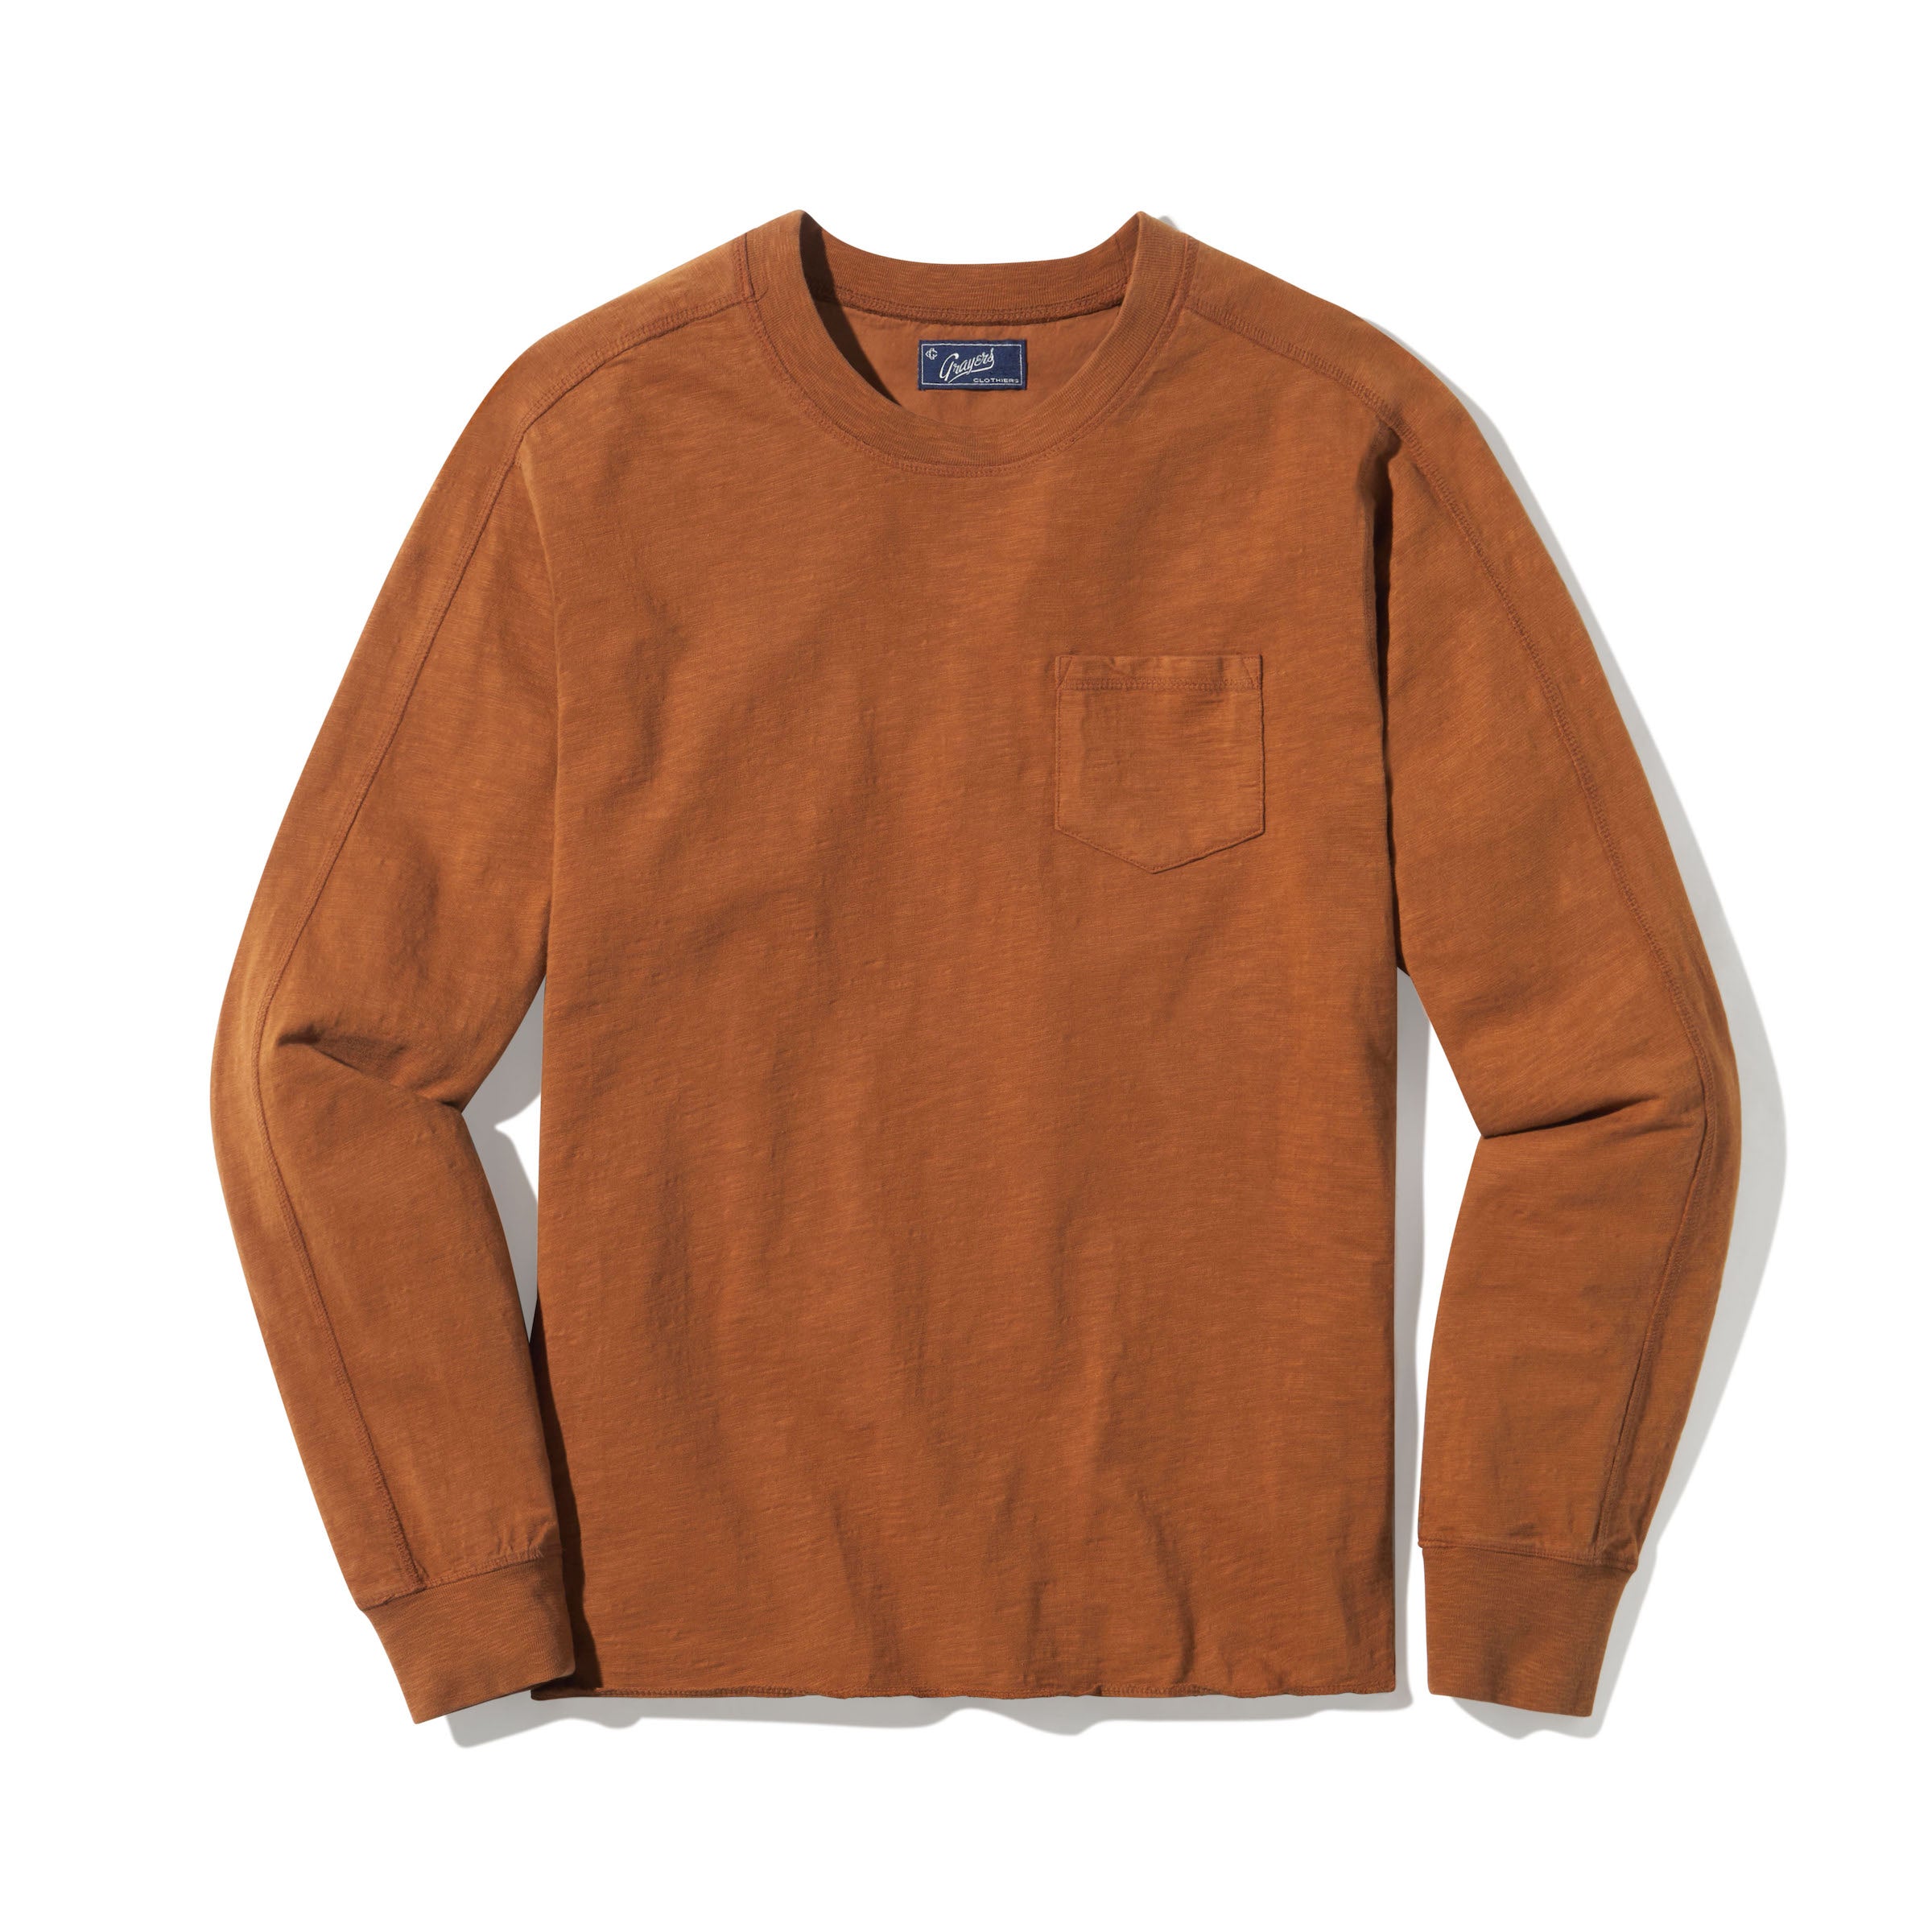 Image of New Cooper Garment Dyed Pocket Tee - Monks Robe